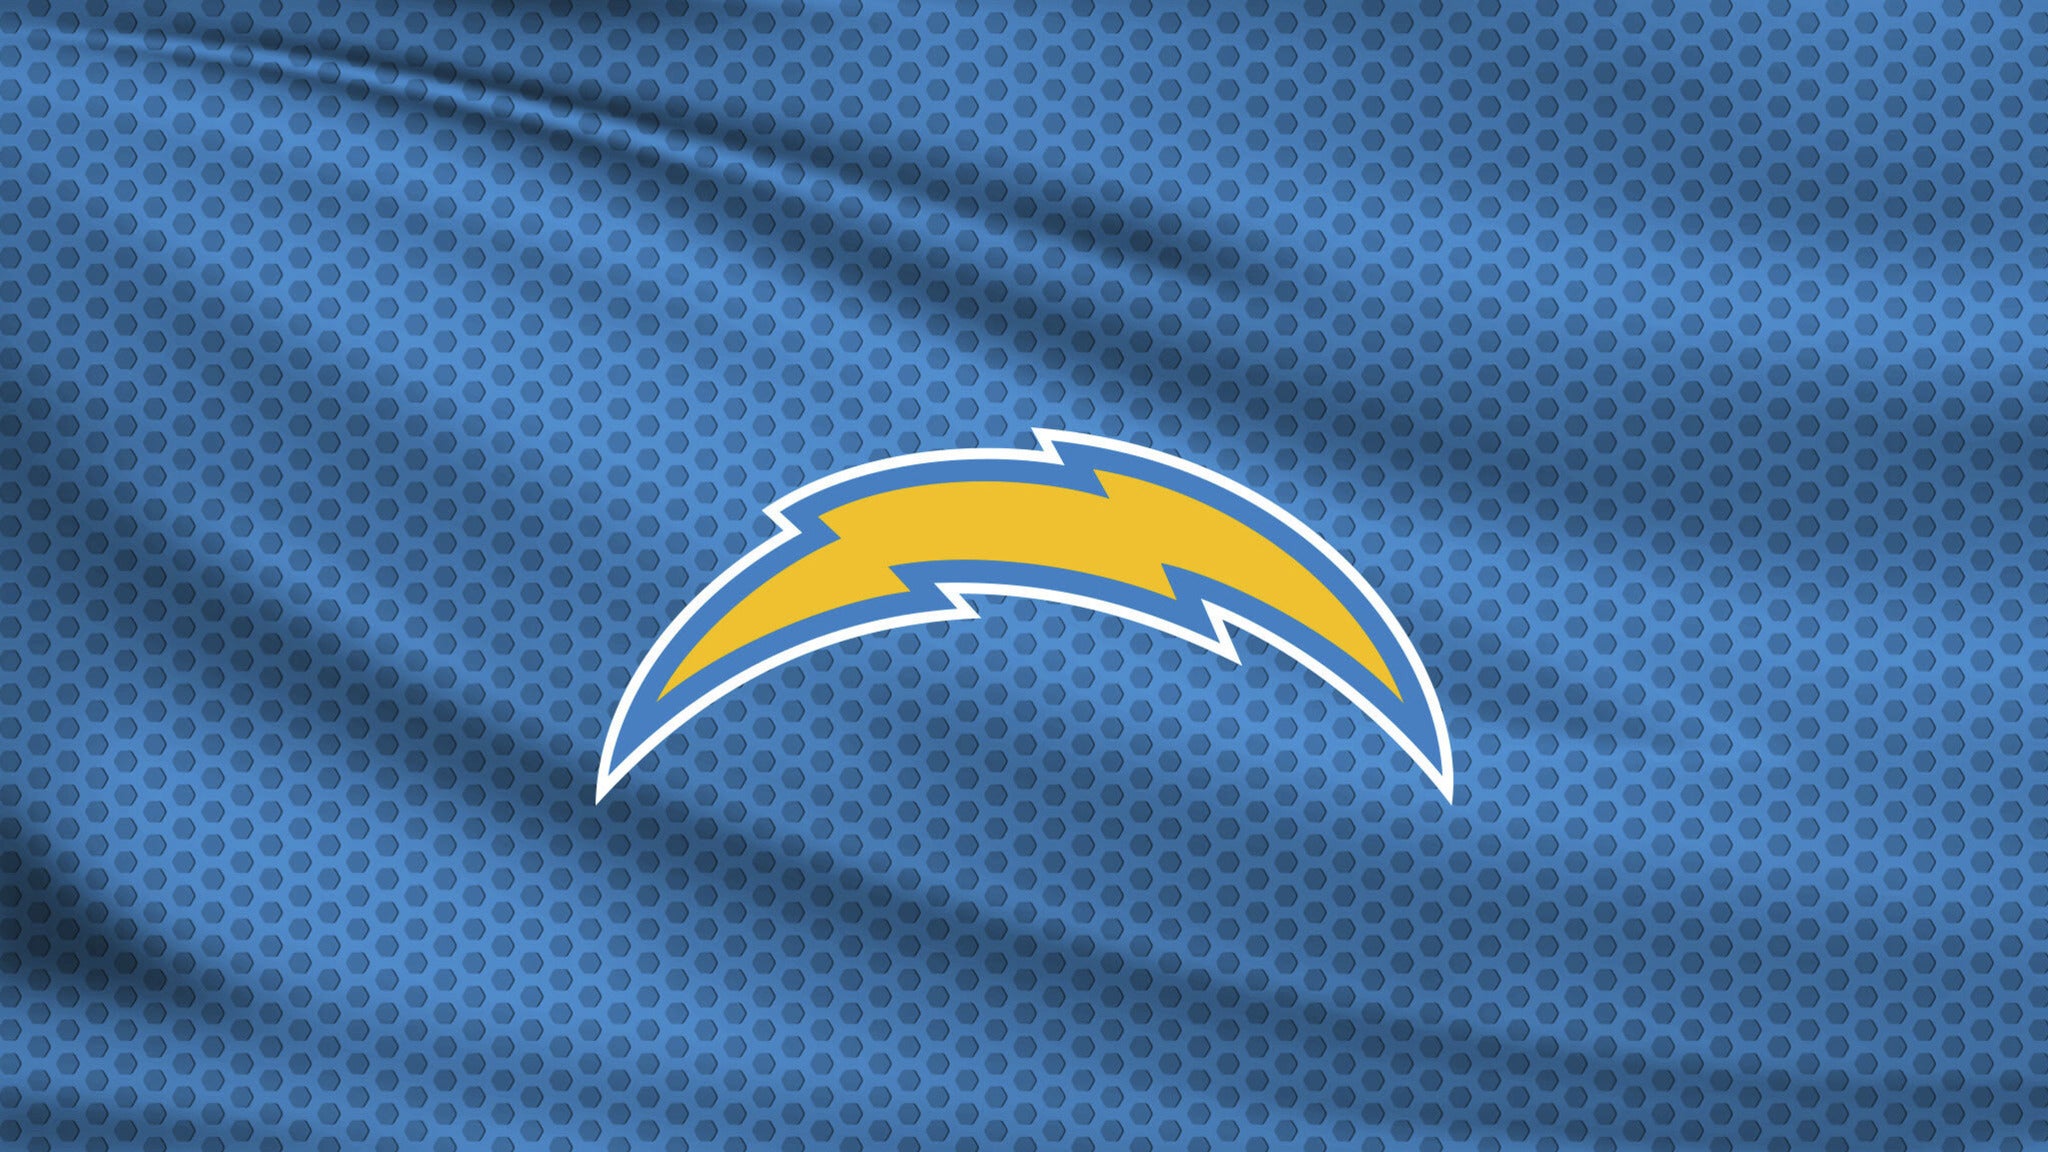 chargers season tickets for sale